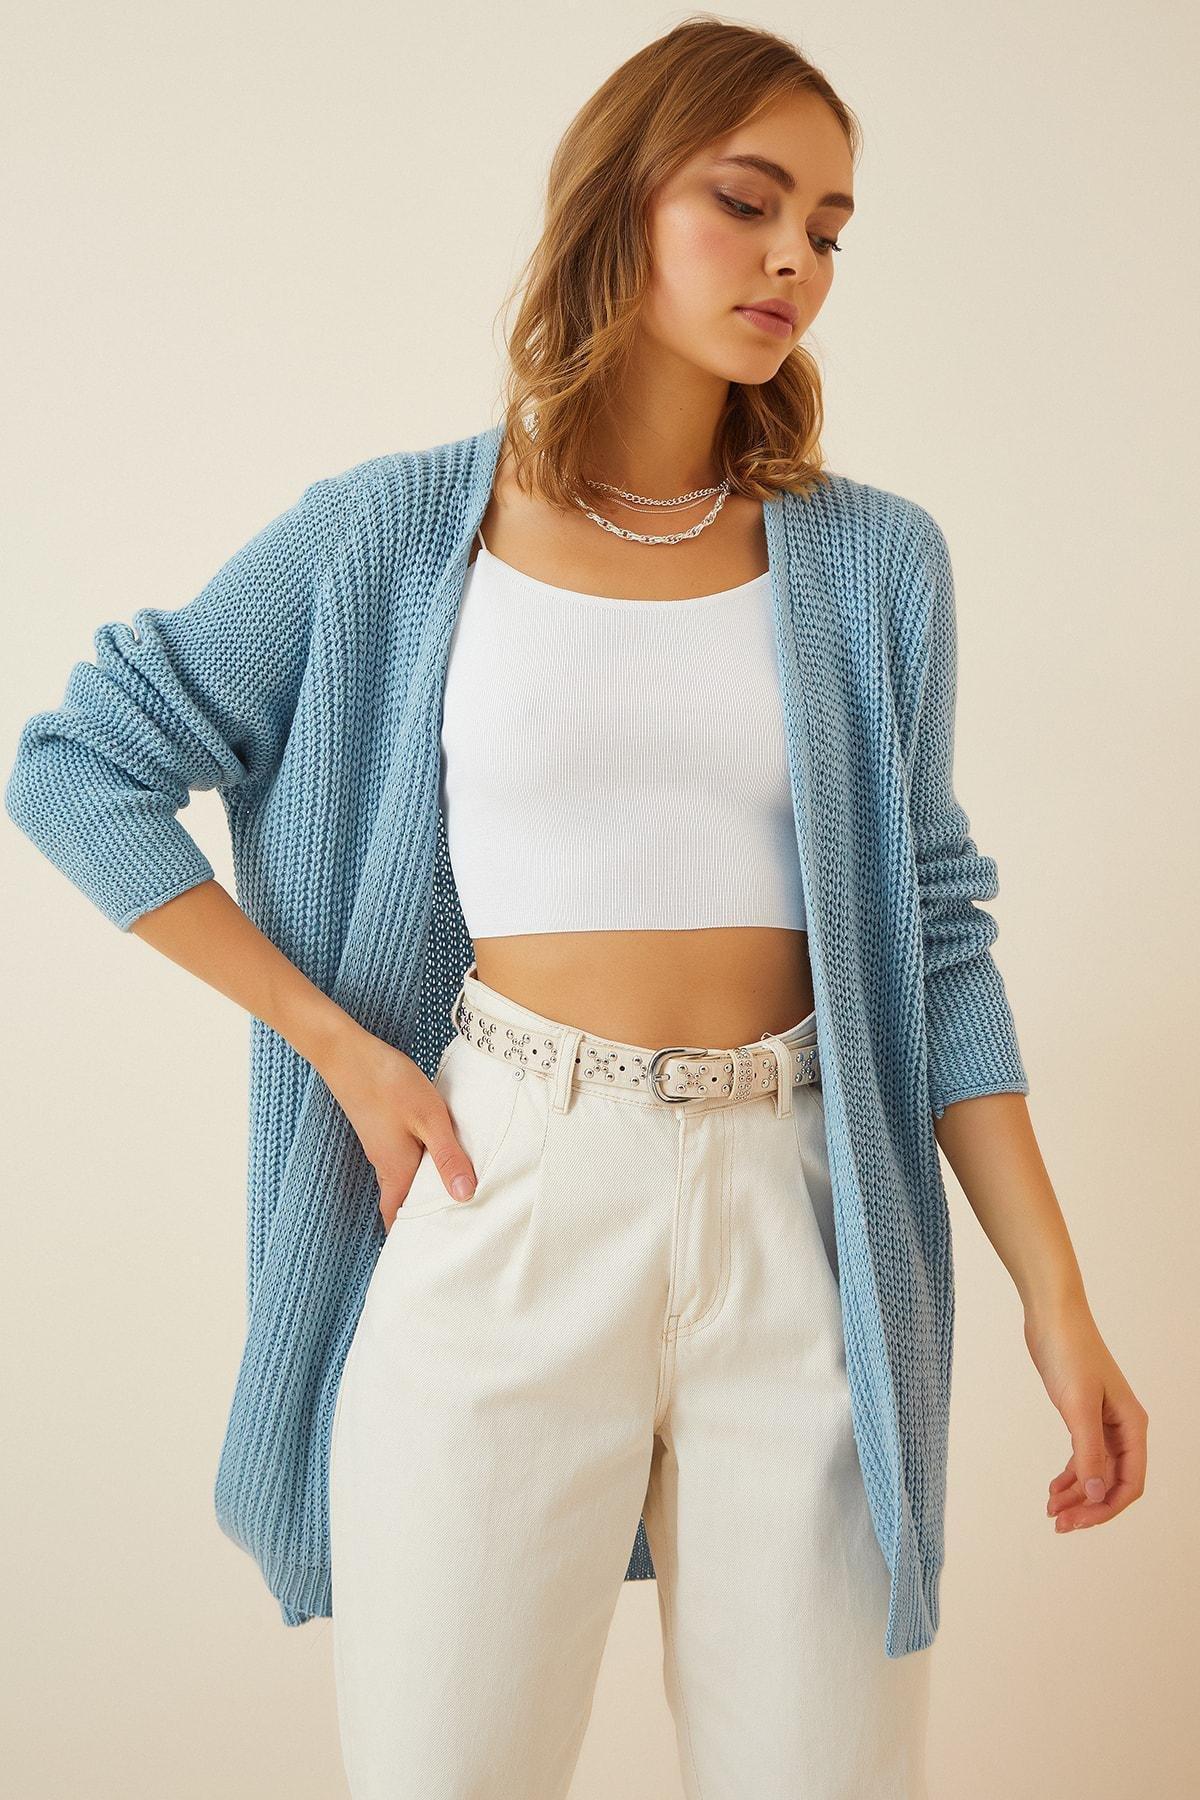 Happiness Istanbul - Blue Knitted Cardigan